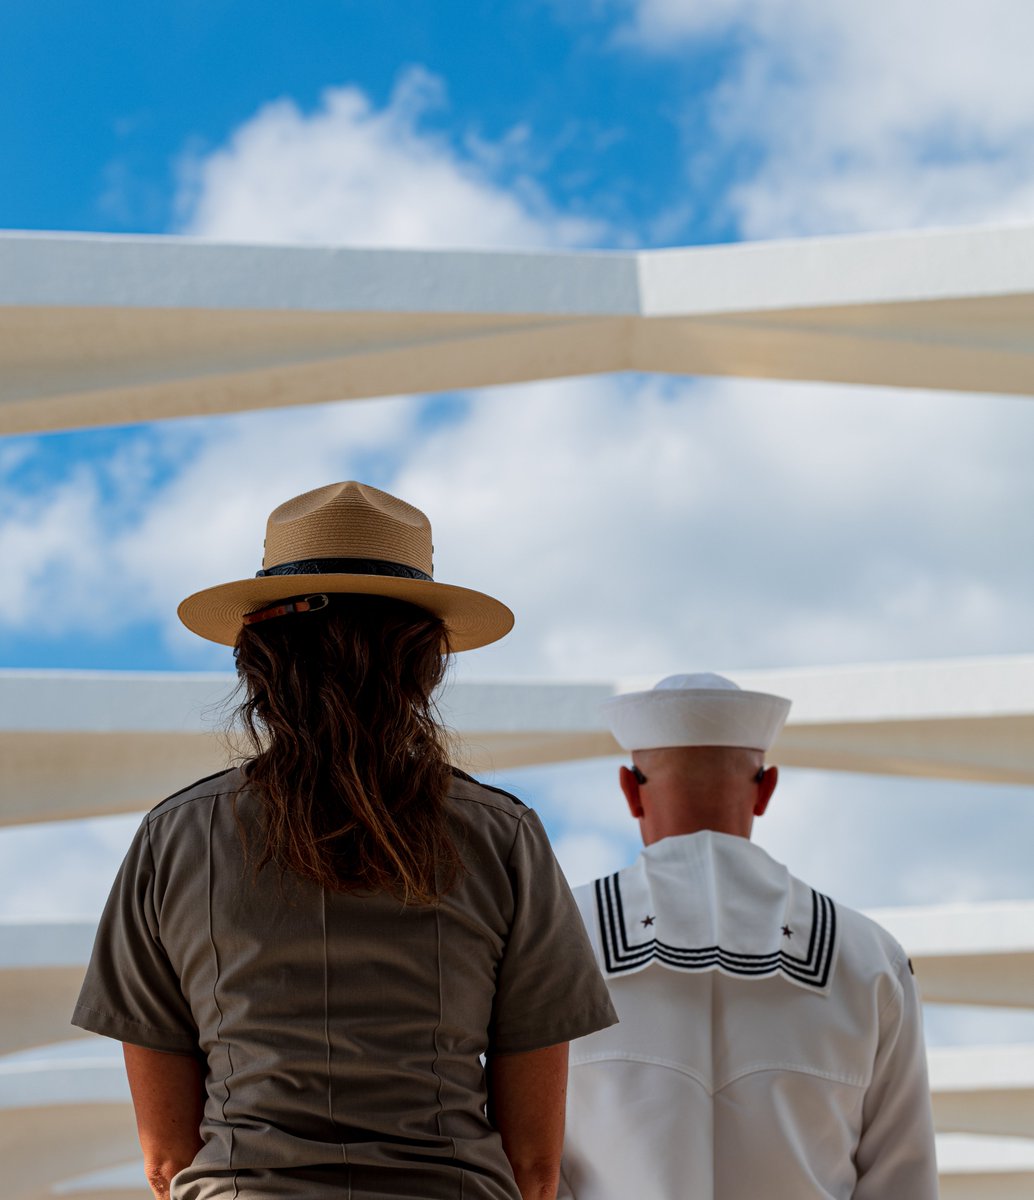 #NationalHatDay! When you visit Pearl Harbor National Memorial, the ranger's 'flat hat' and the Navy's white service hat are two of the most iconic hats you’ll see. Both hats are a symbol of each respective service's commitment and dedication to the nation. #PearlNPS #Navy